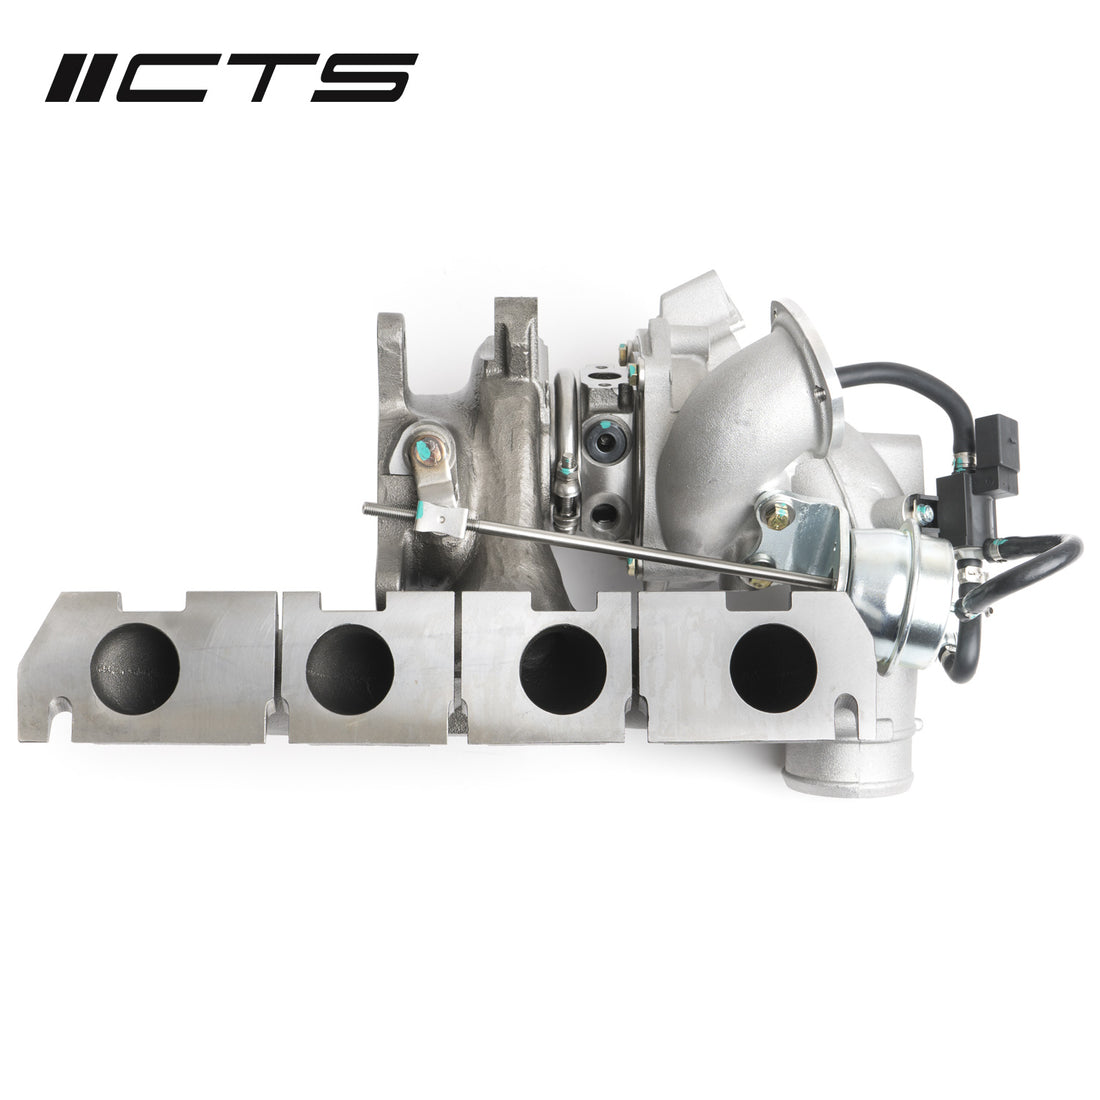 CTS Turbo K04 Turbocharger Upgrade for FSI and TSI Gen1 Engines (EA113 and EA888.1) CTS Turbo TR-1050